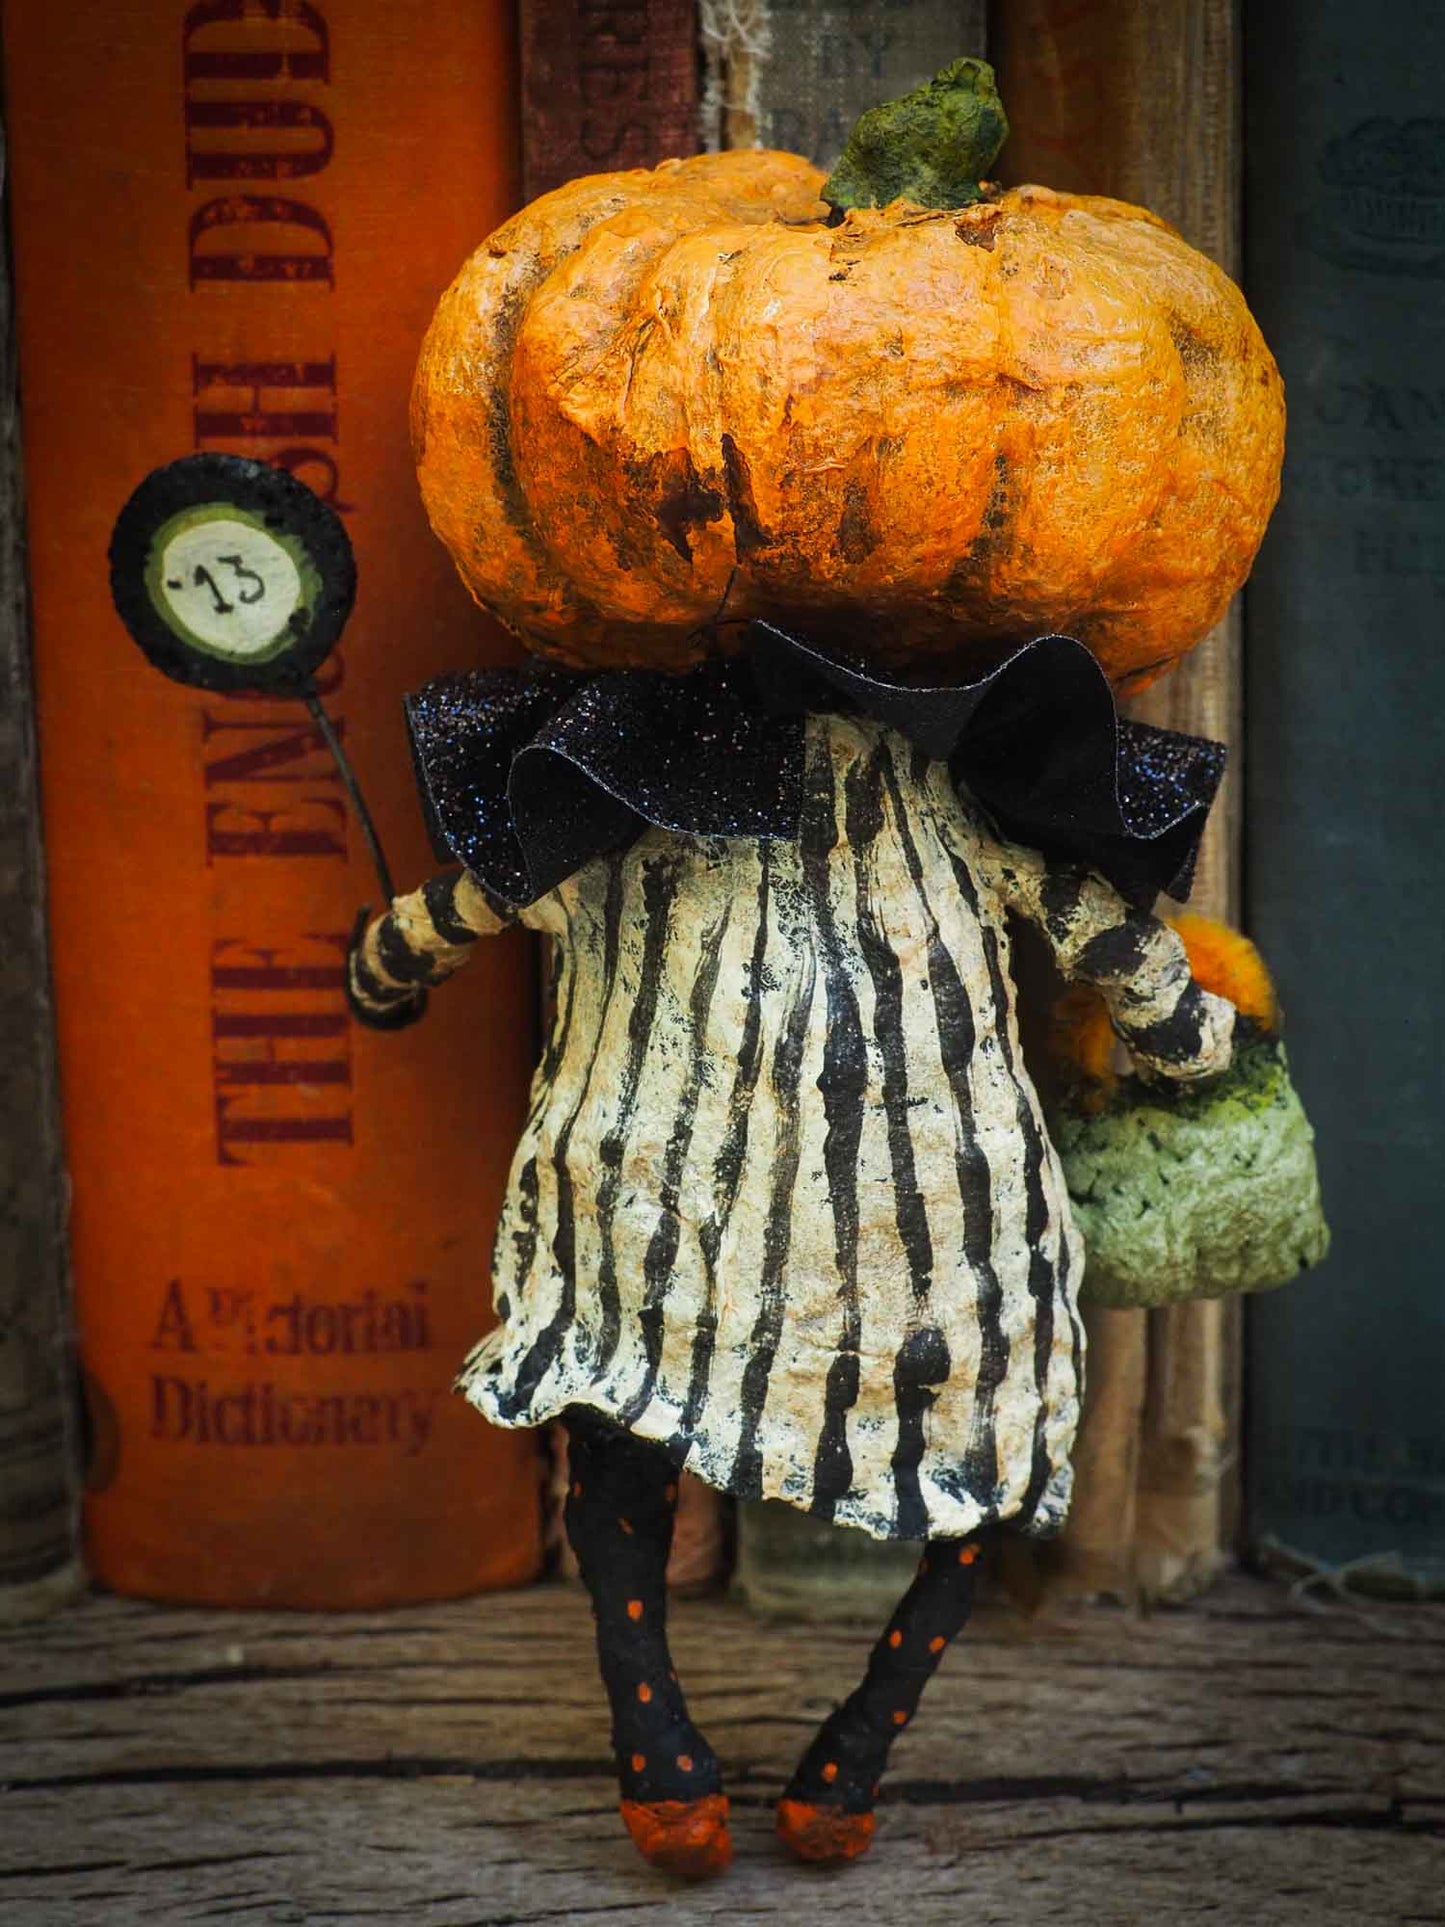 pumpkin jack-o-lantern ornament Halloween decoration. Danita art original handmade art doll pumpkin made with spun cotton from collection of witches, ghosts, skeletons, jack-o-lantern, pumpkin, vampire, ghouls and other whimsical folk art style home decor.